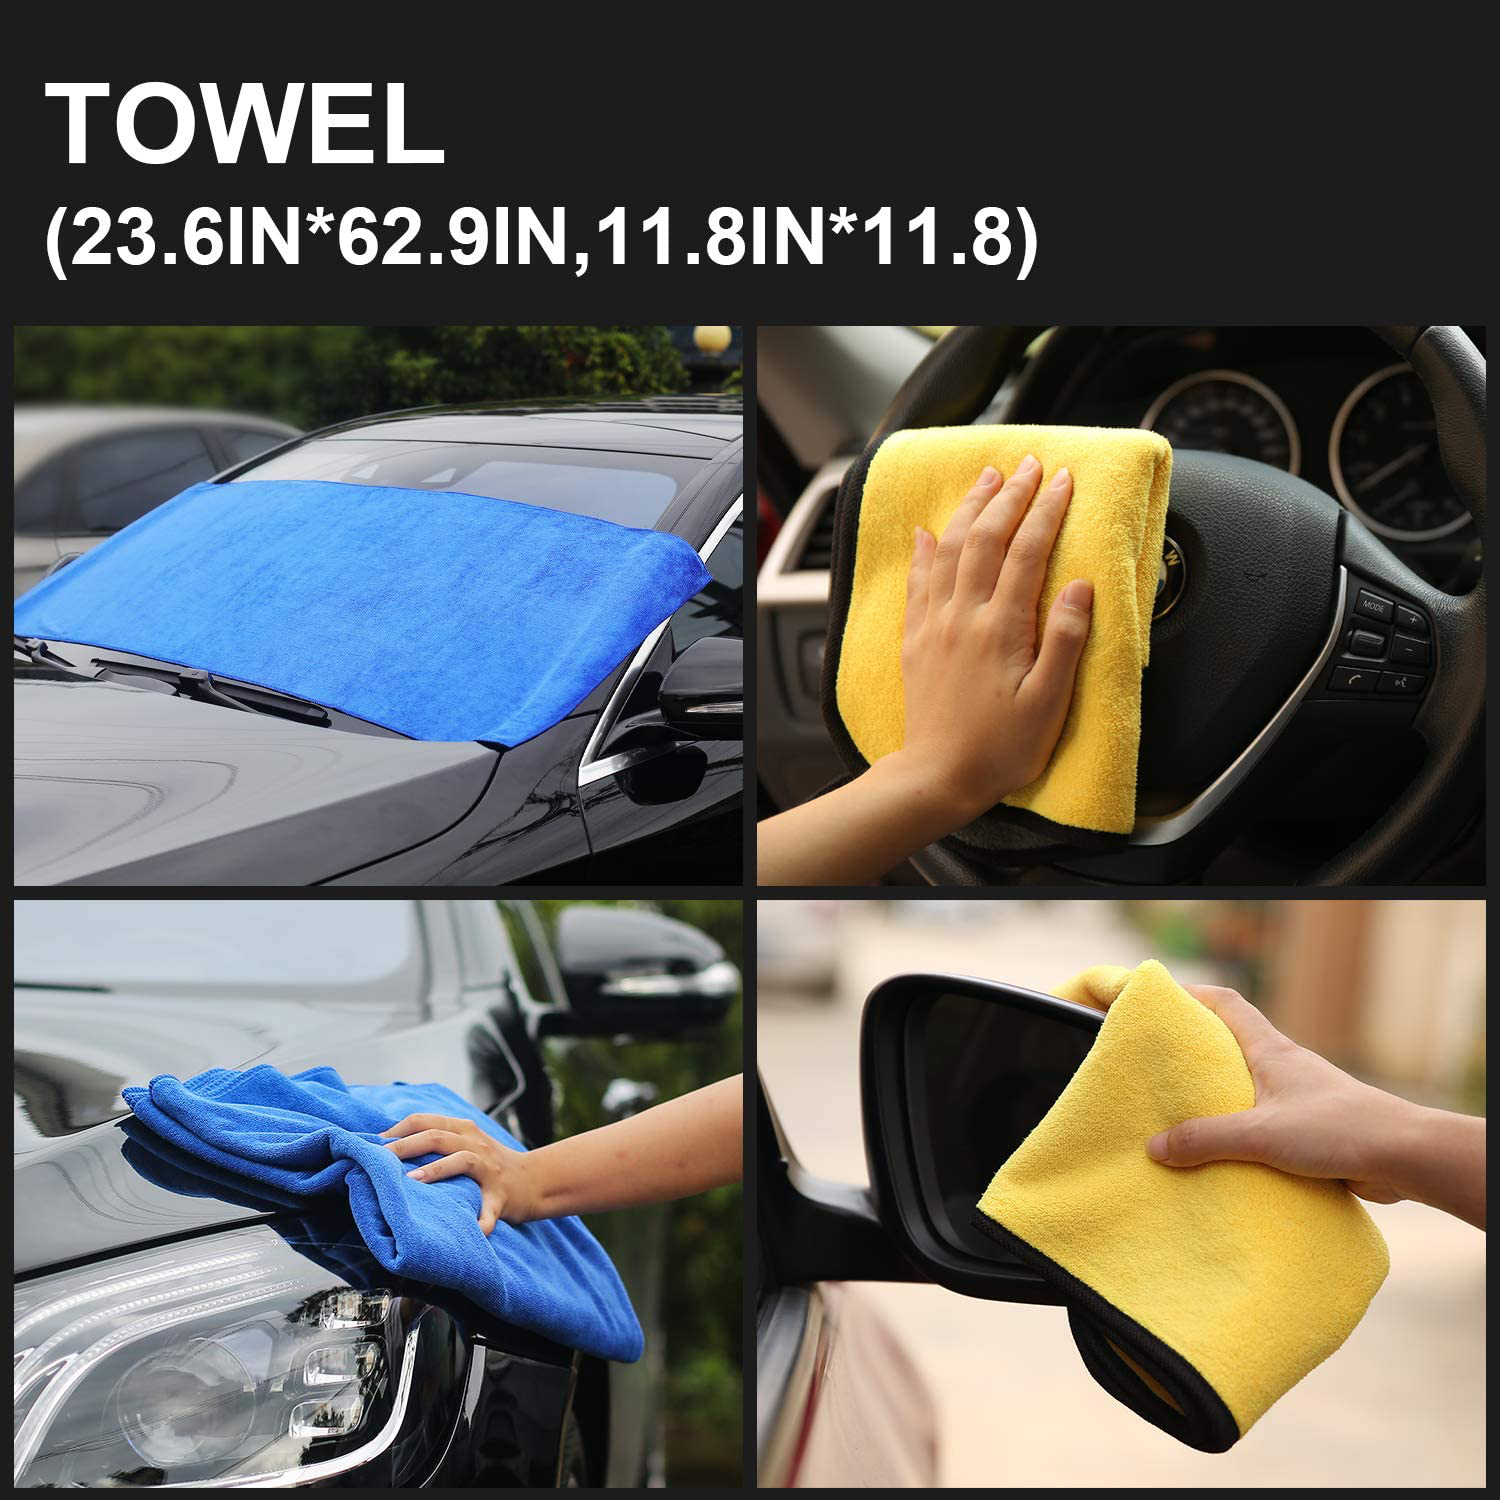 AUTODECO 10pcs Car Cleaning Tools Kit, Detailing Interiors Premium Microfiber Cleaning Cloth - Car Wash Mitt - Tire Brush - Window Water Blade with Storage Box